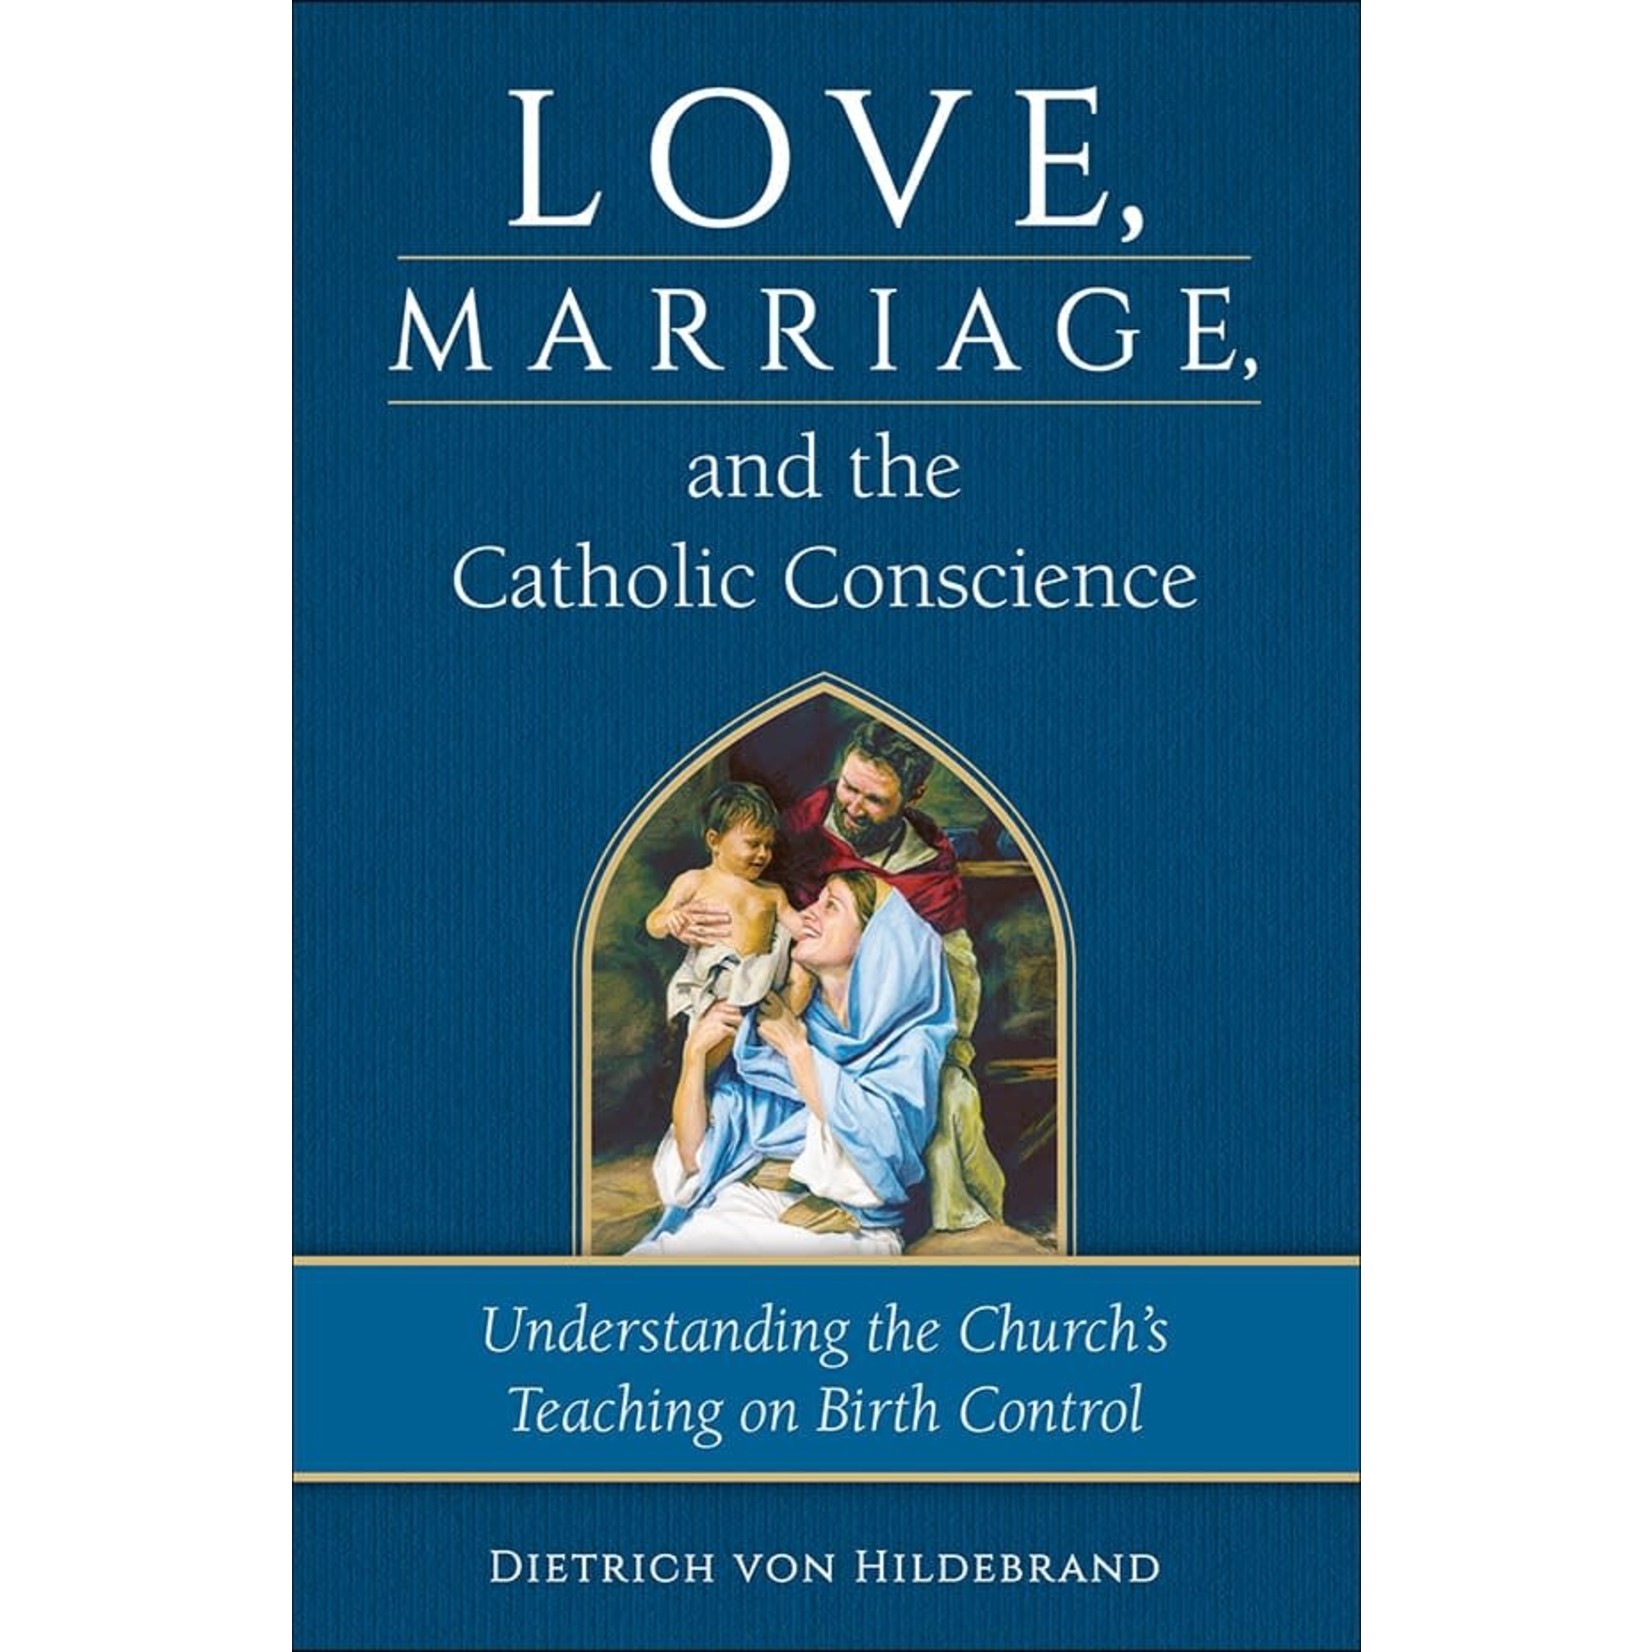 Love, Marriage, and the Catholic Conscience